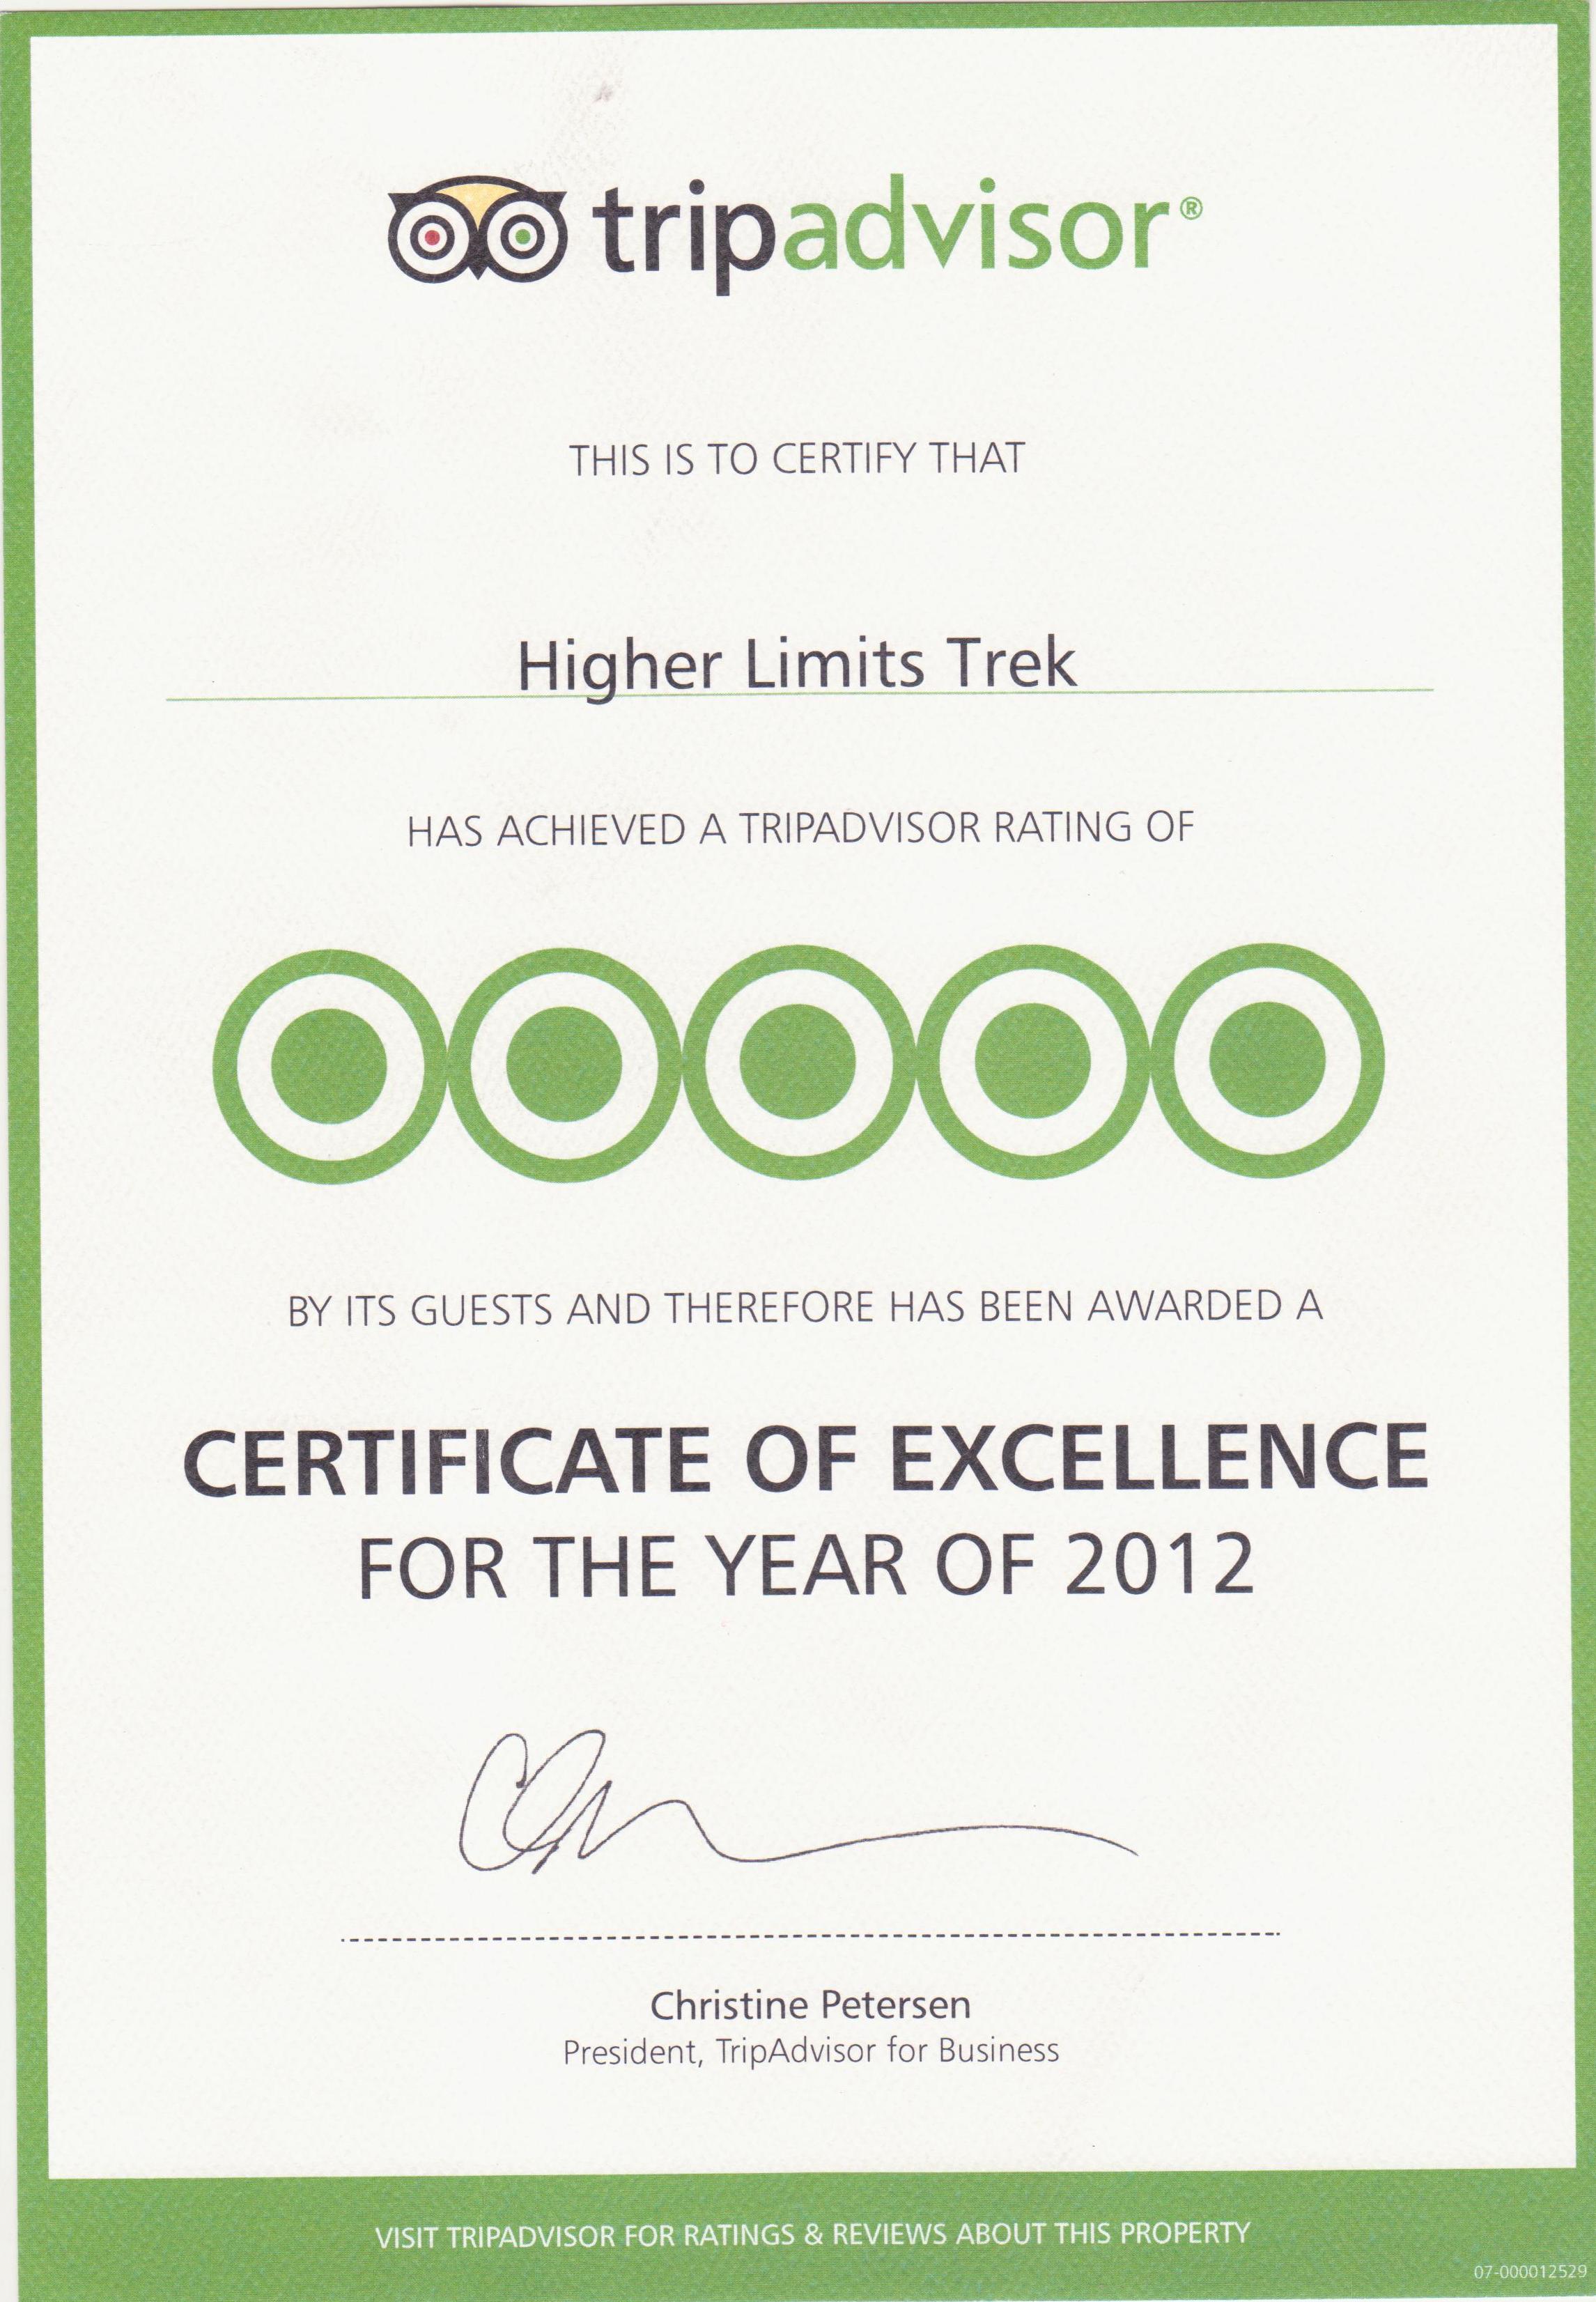 Certificate of excellence 2012